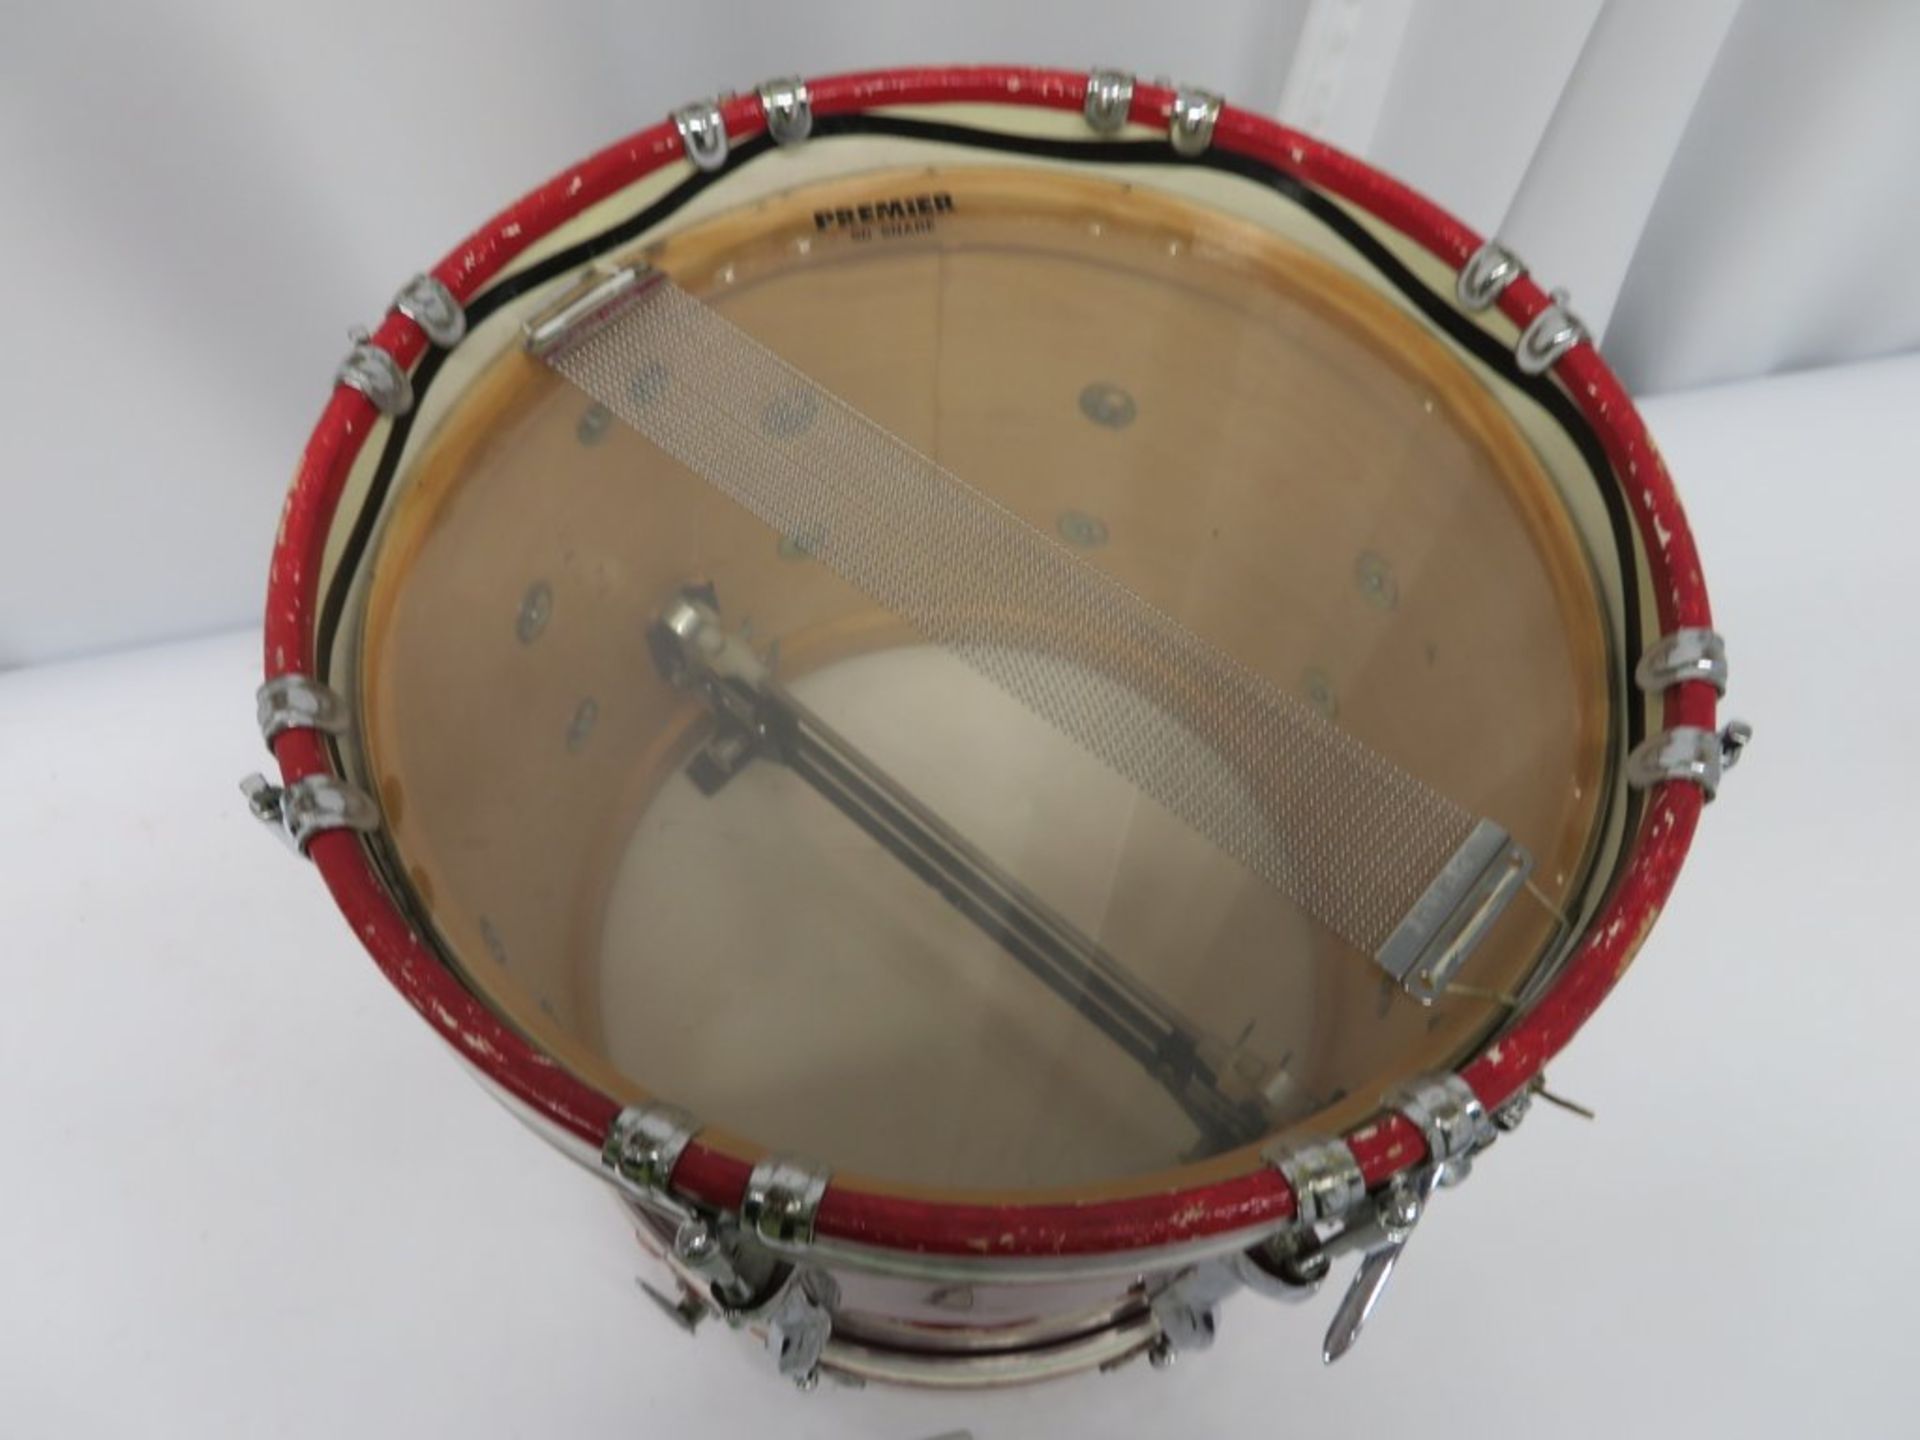 Premier Side Marching Snare Drum. - Image 6 of 8